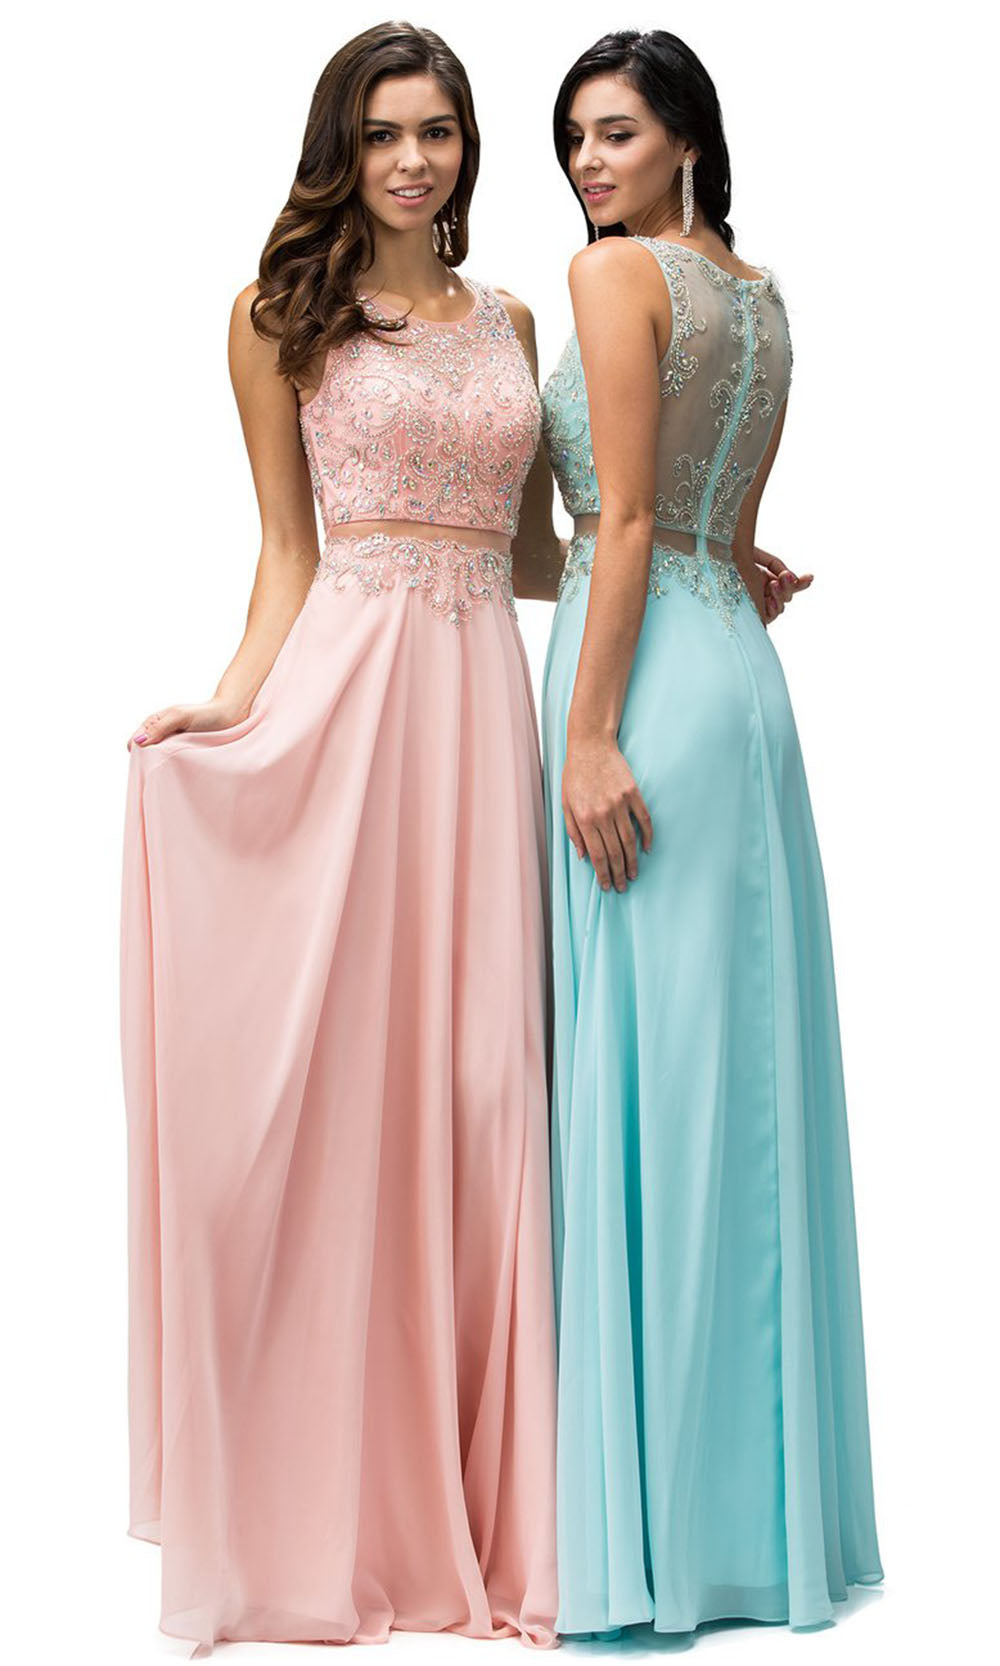 Dancing Queen - 9150 Illusion Two-Piece Beaded Bodice A-Line Gown In Pink